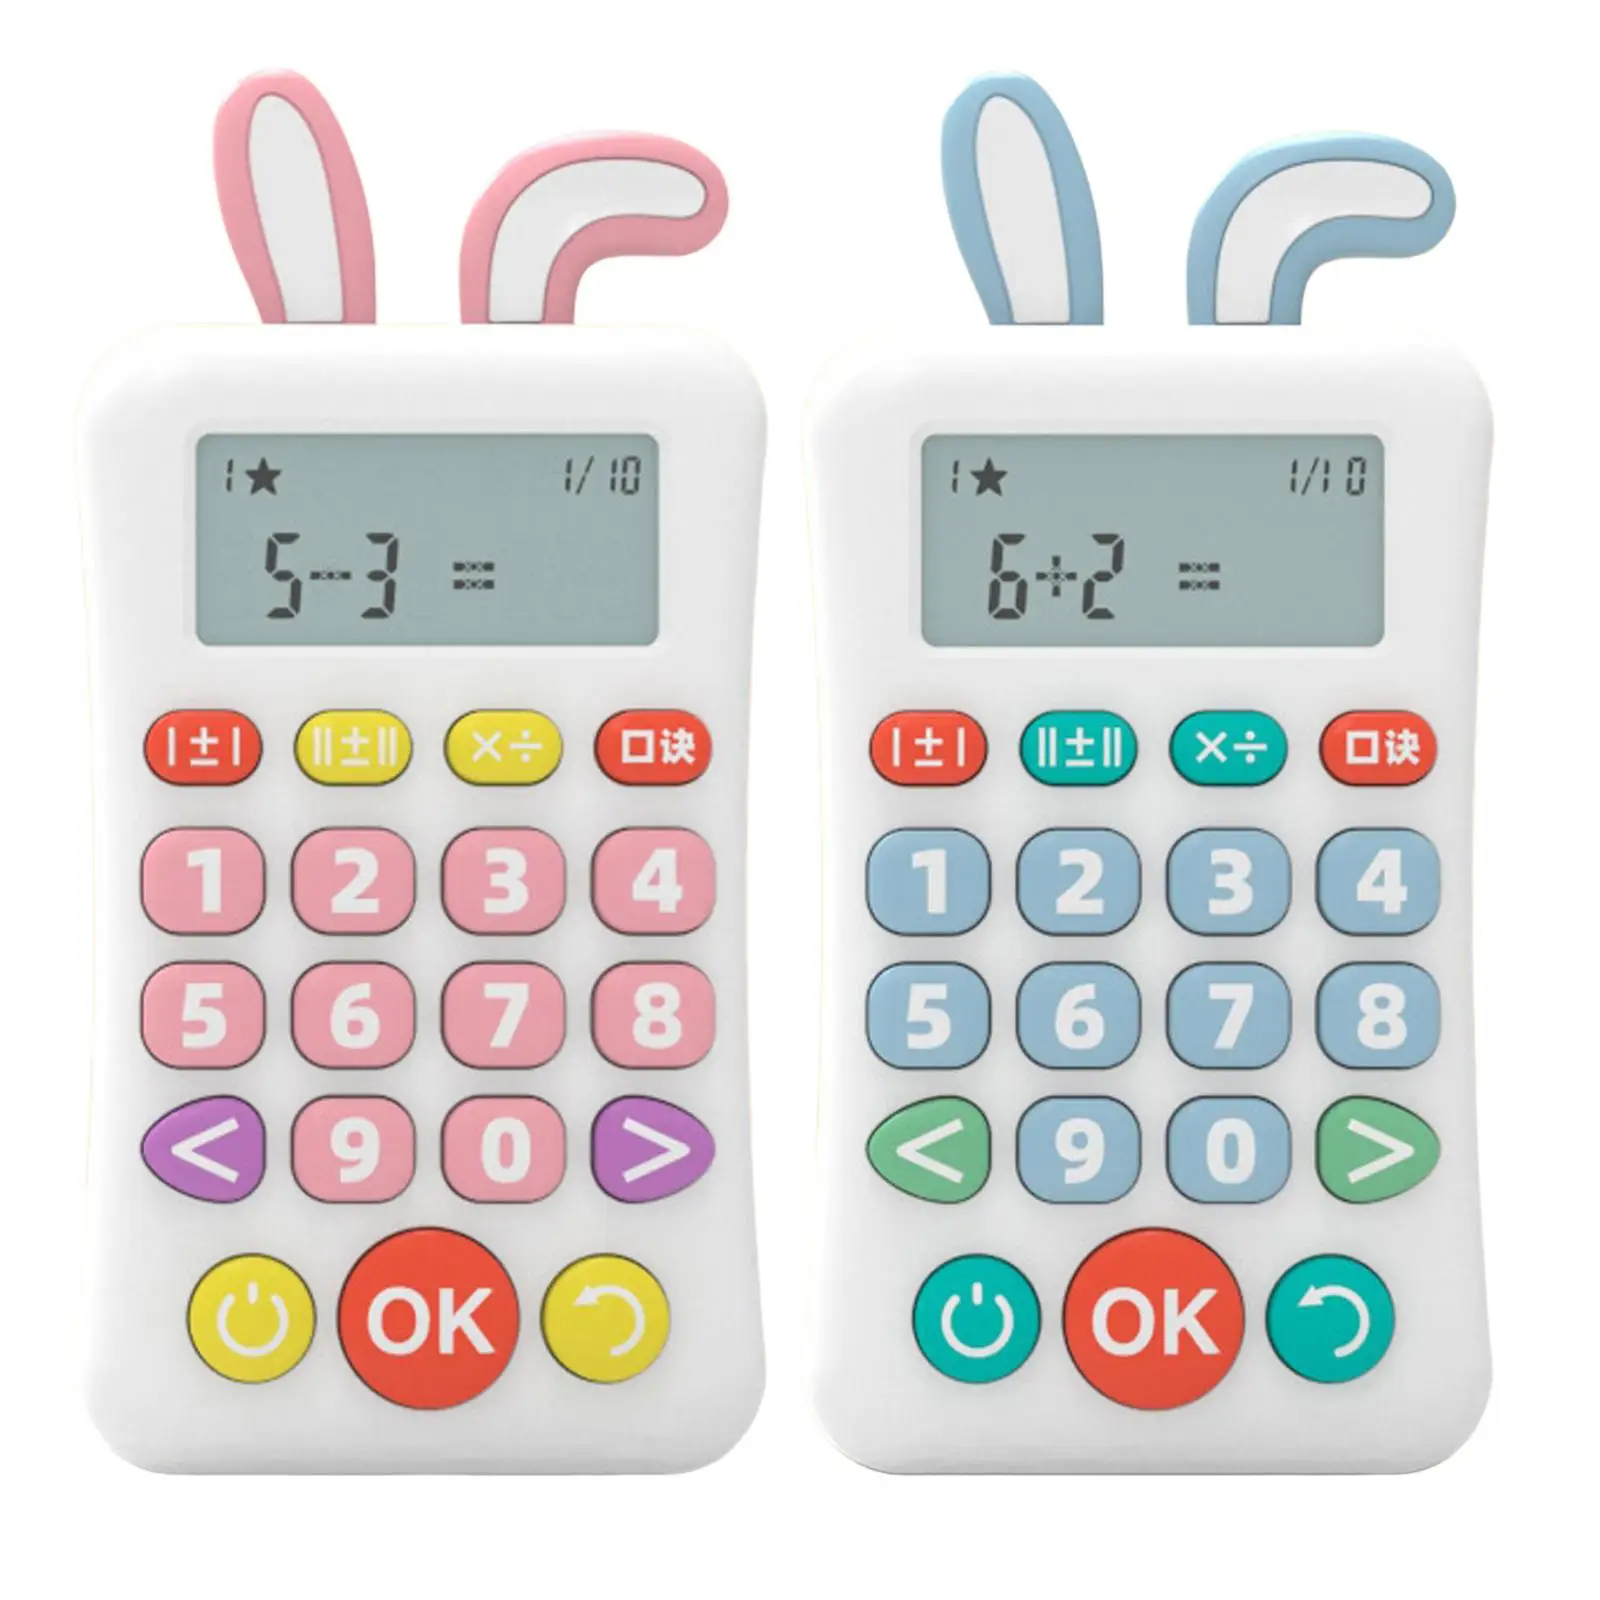 Functional Math Calculation Intelligent Learning Machine Mathematics Learning Aids Electronic Calculator for Homeschool Kids